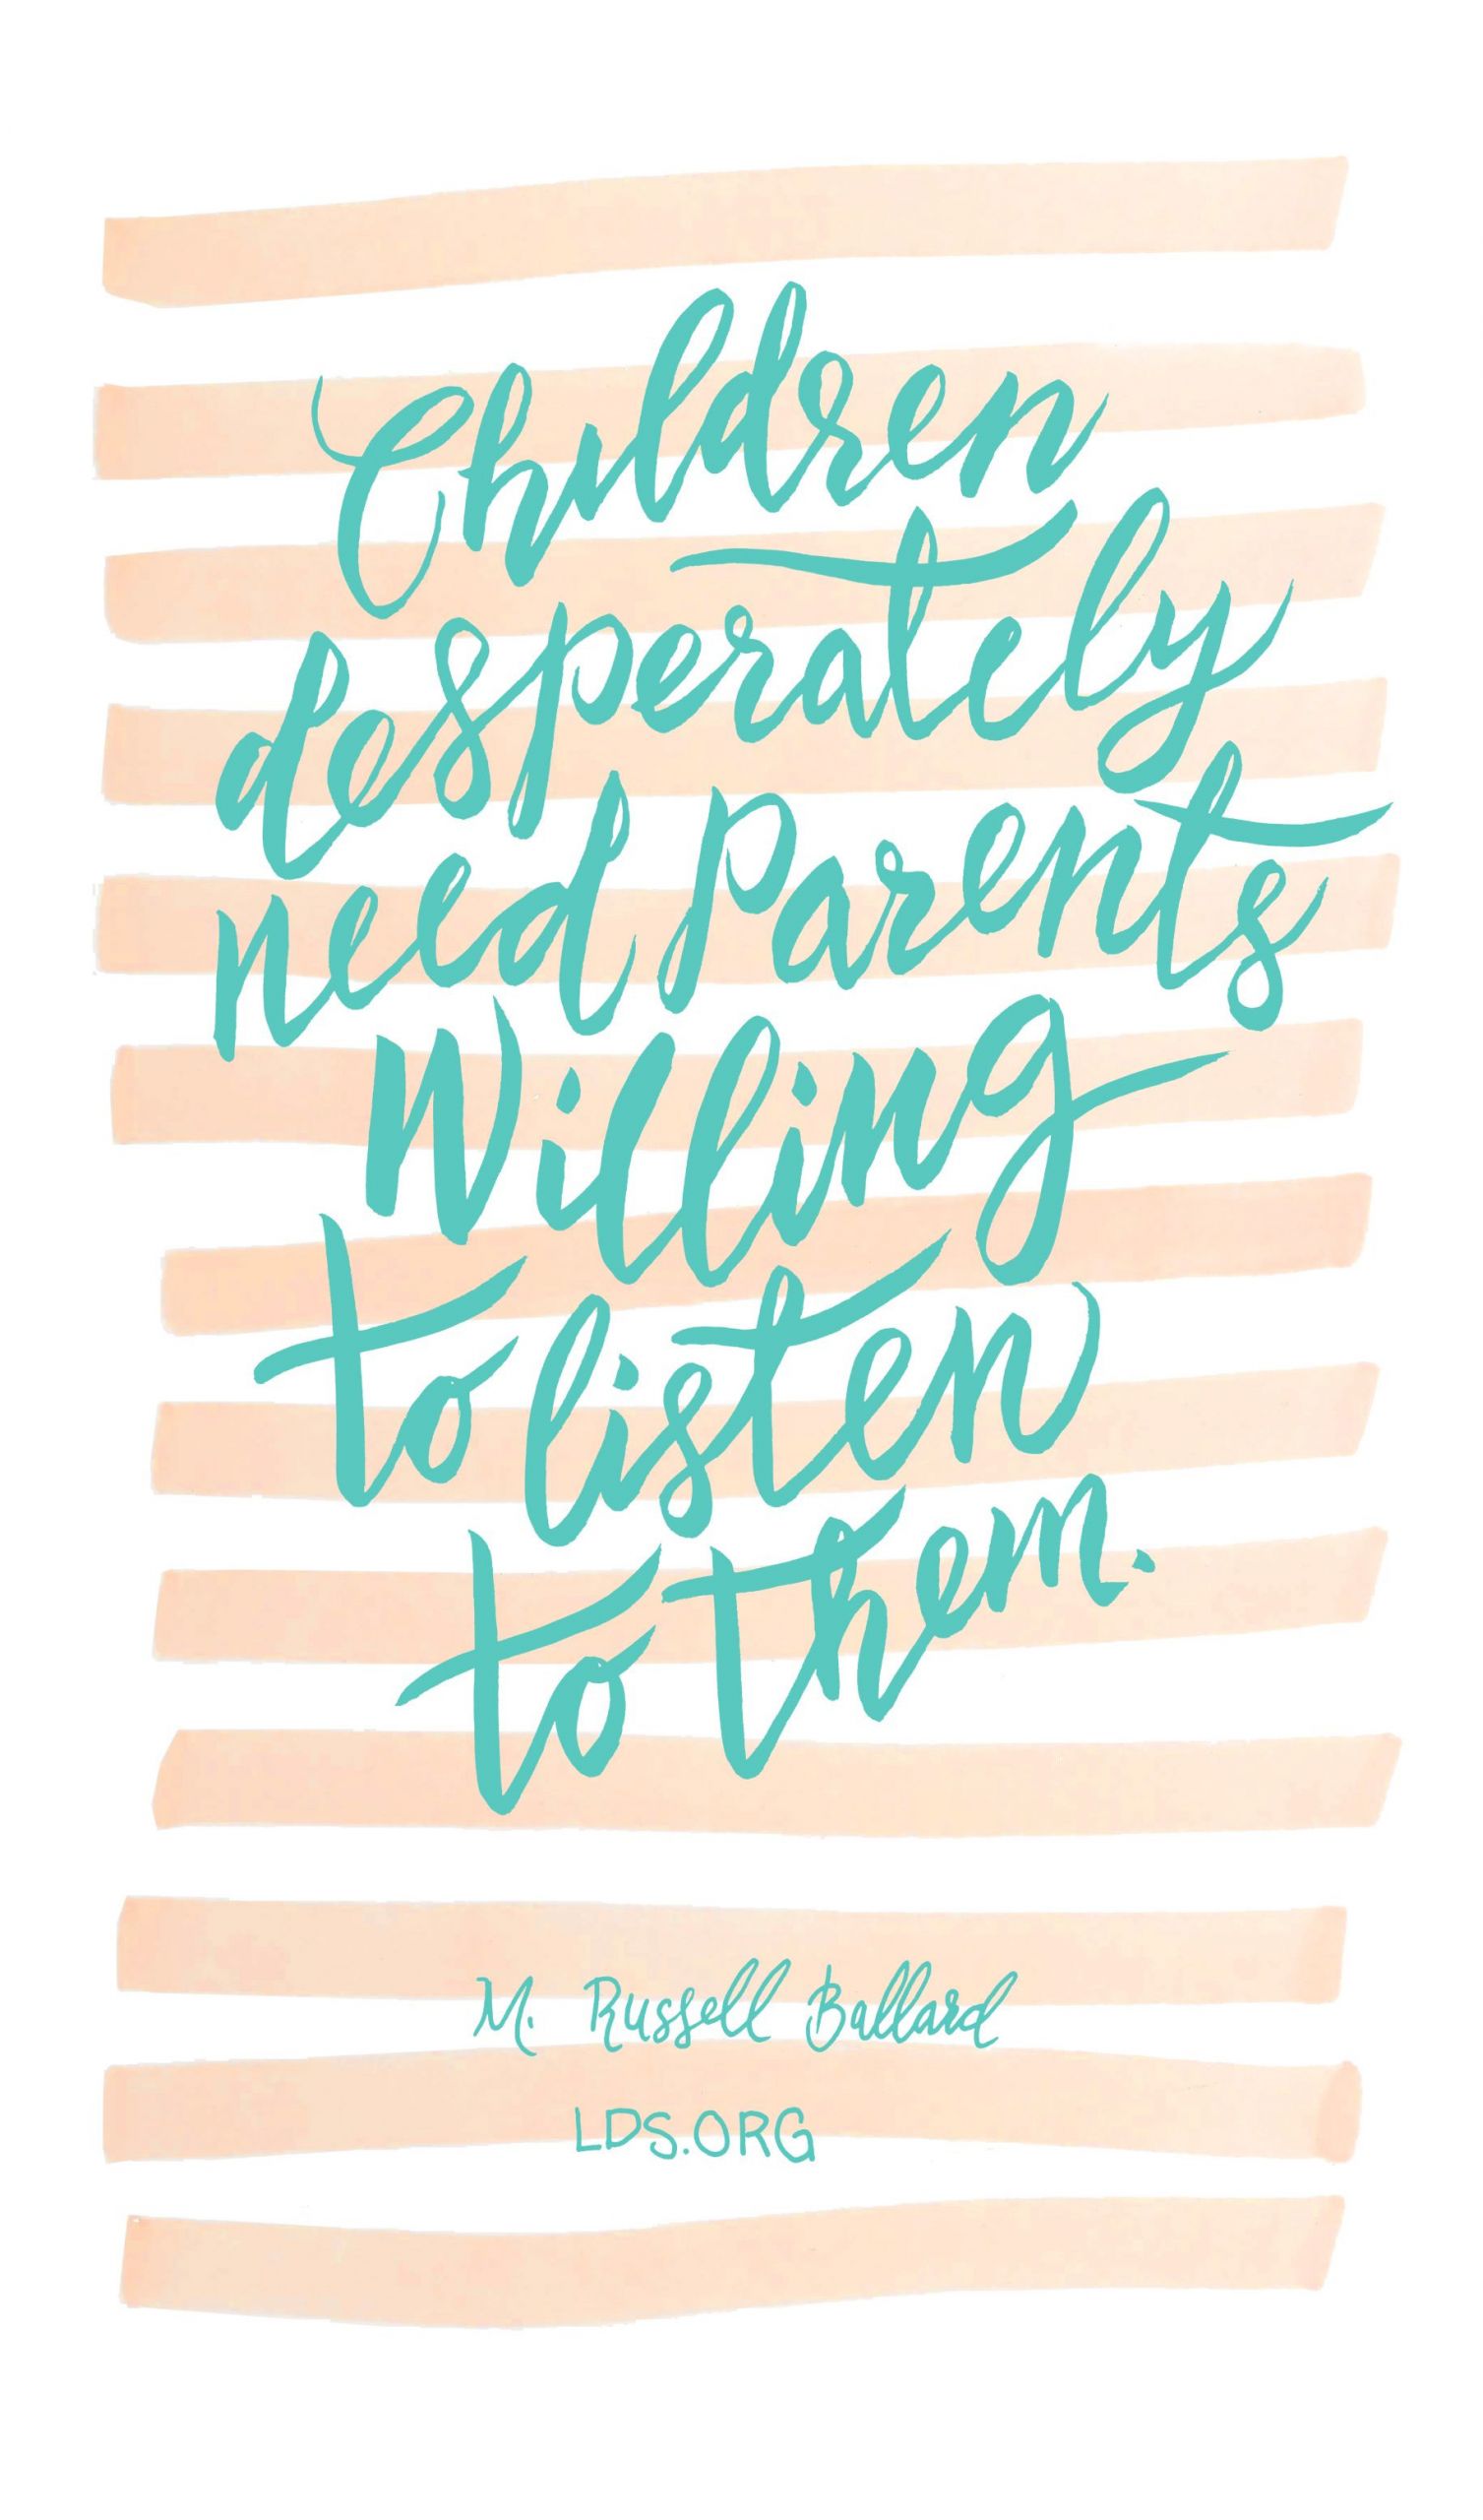 Lds Quotes On Children
 Children desperately need parents willing to listen to